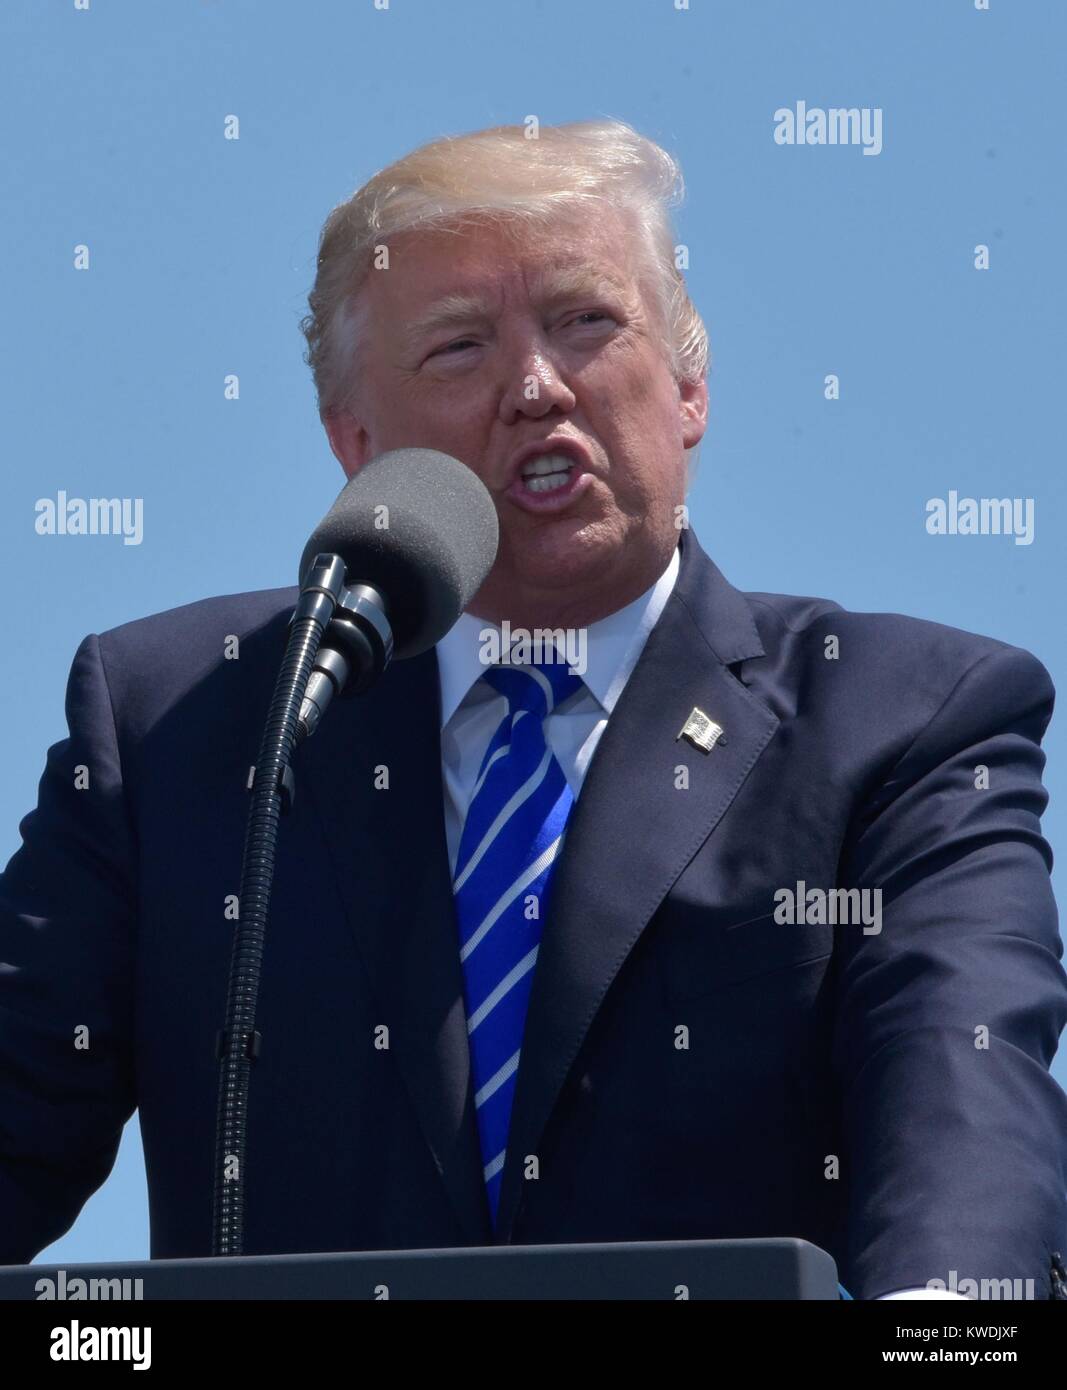 President Donald Trump delivering the commencement address to US Coast Guard cadets. New London, Connecticut, May 17, 2017 (BSLOC 2017 19 11) Stock Photo